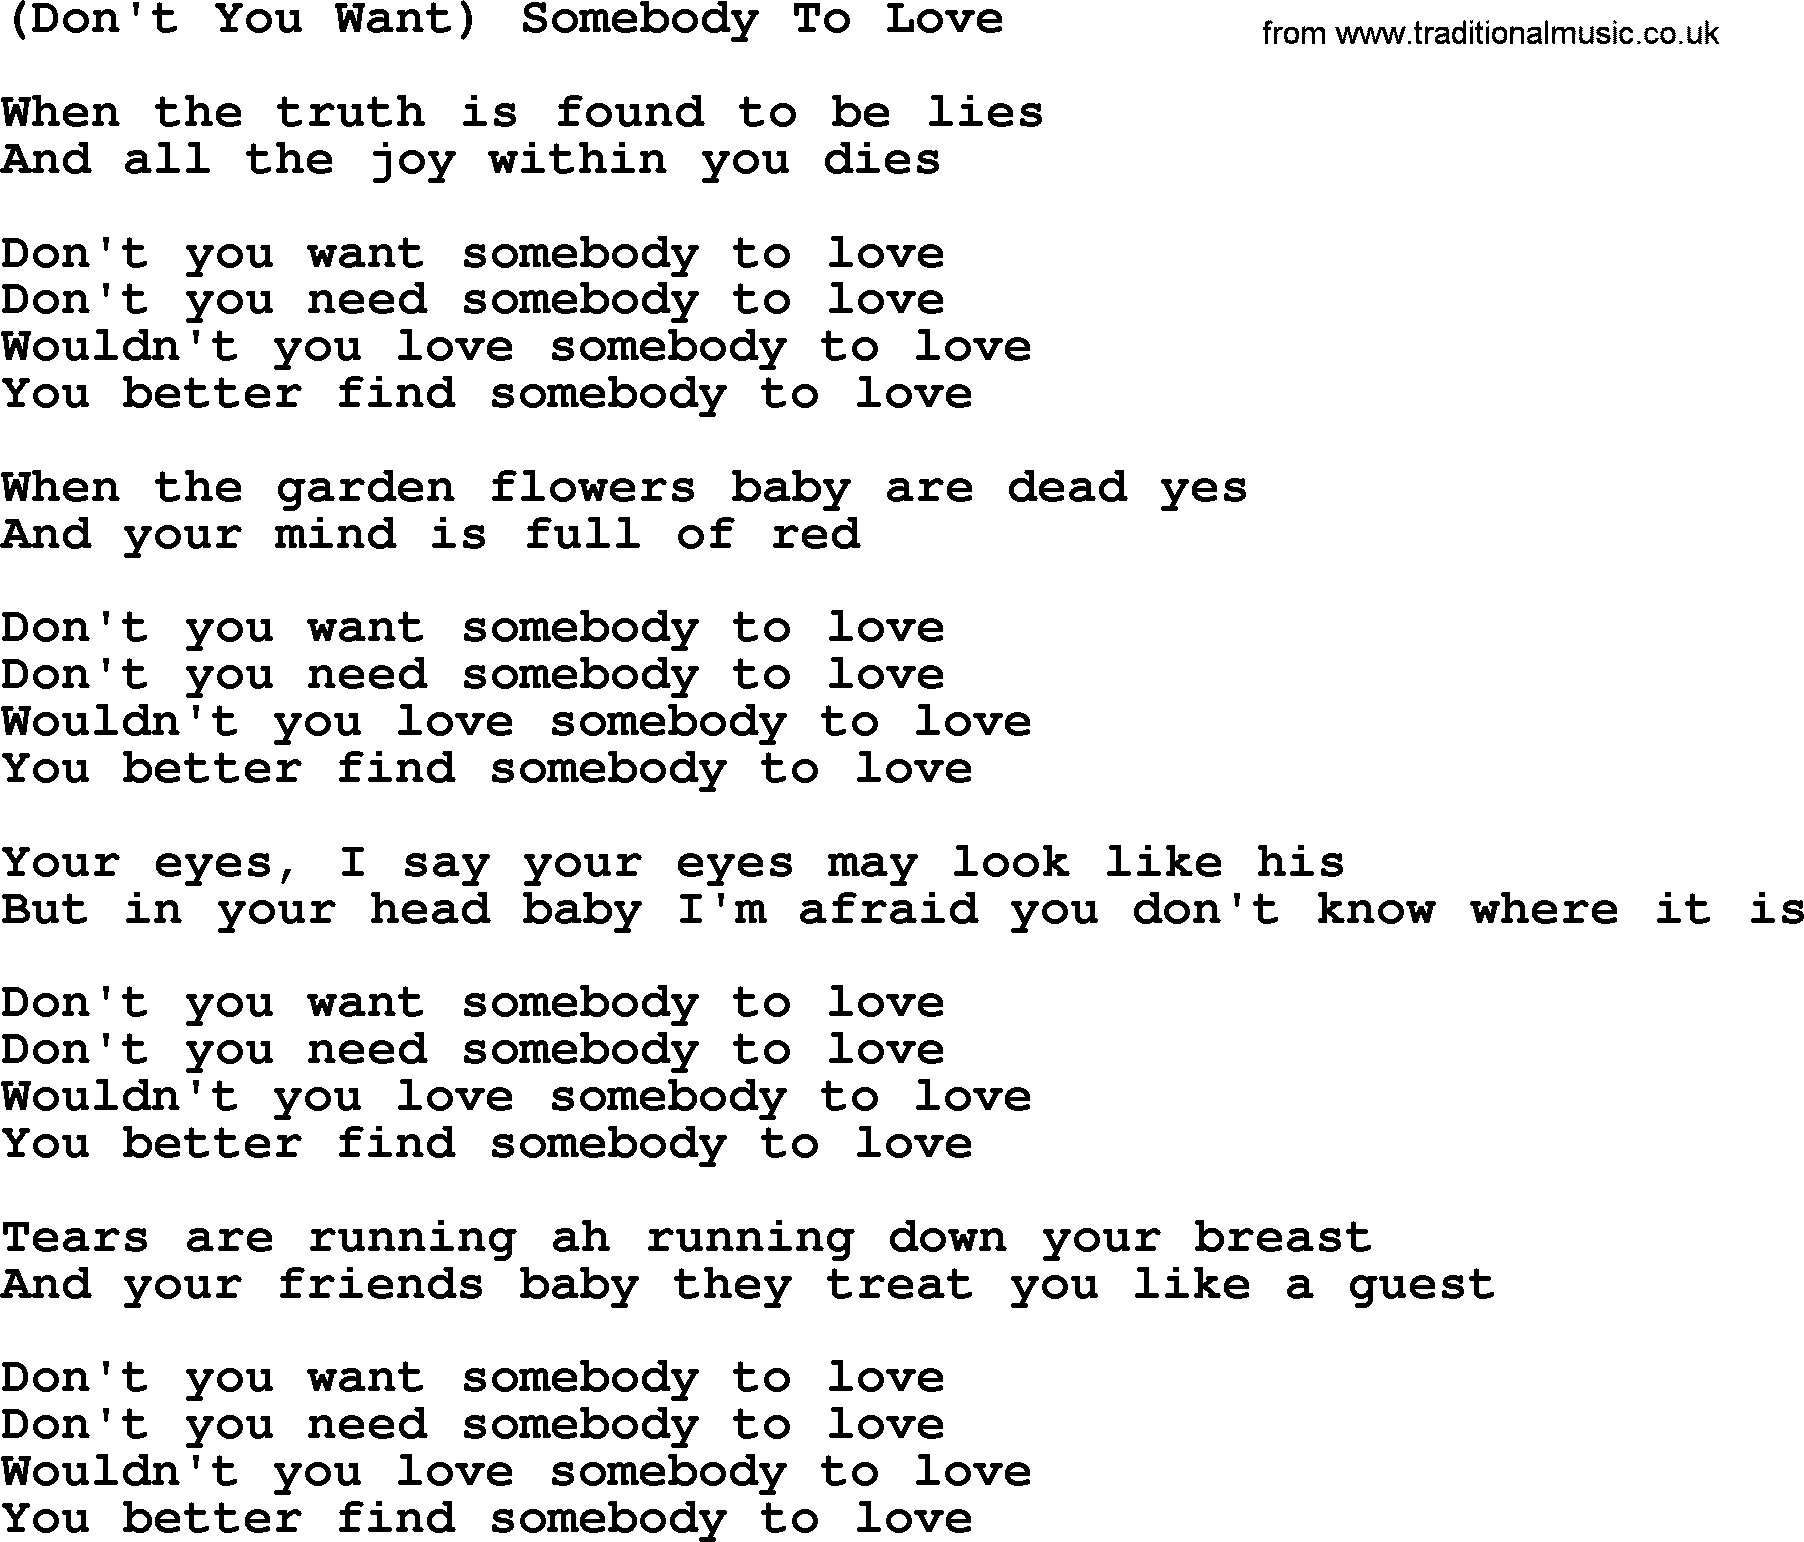 The Byrds song Don't You Want Somebody To Love, lyrics